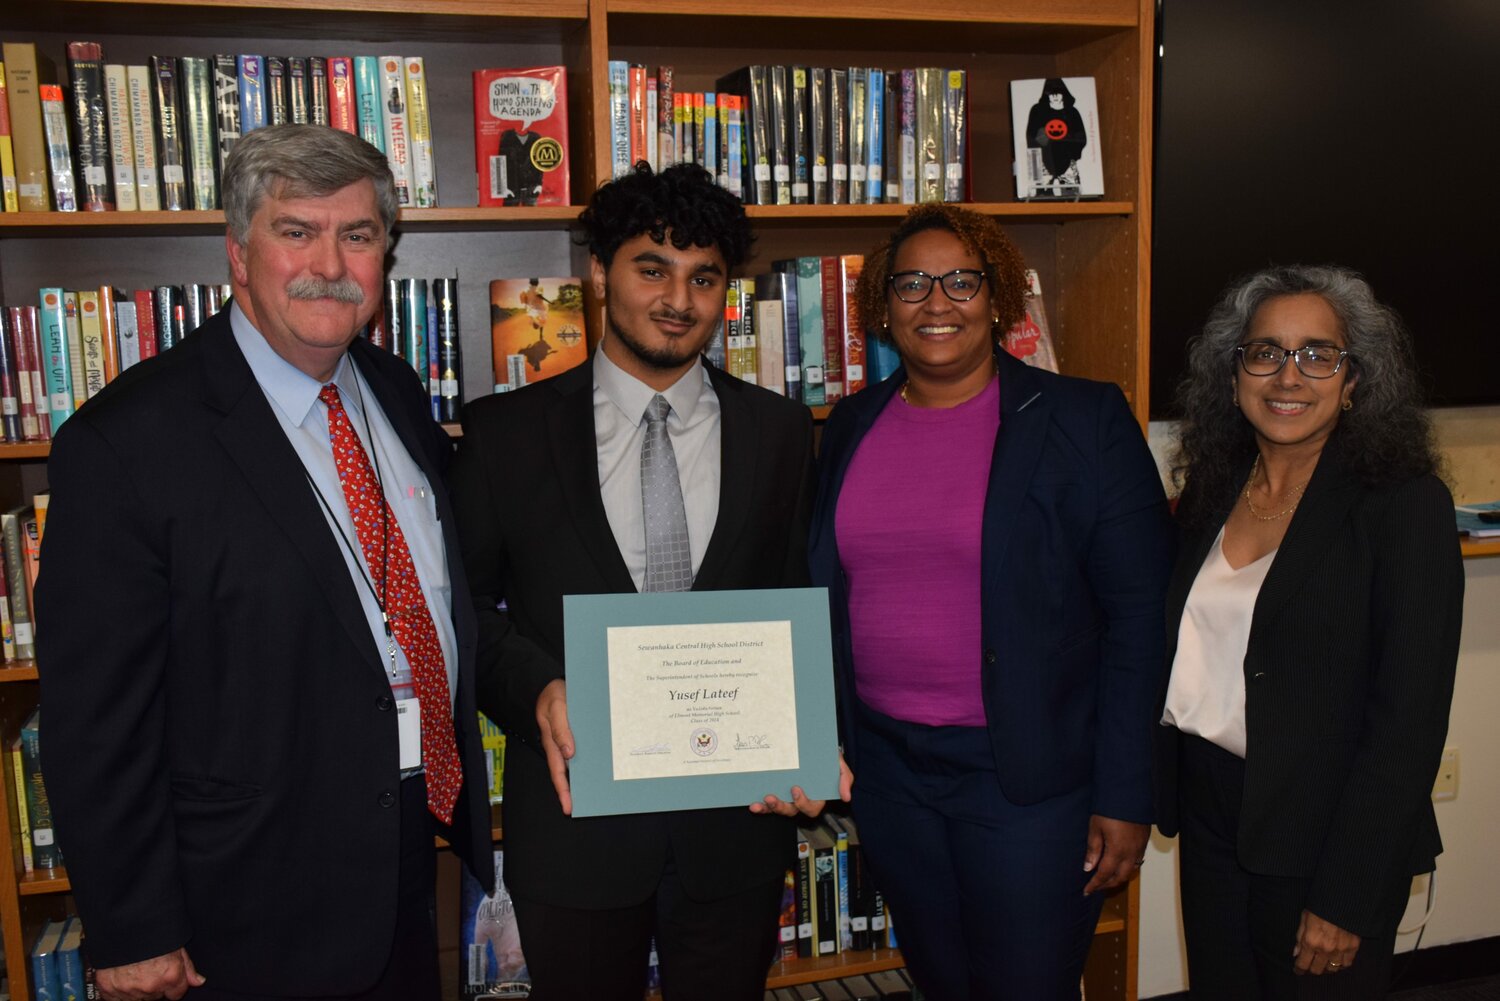 Dr. Thomas Dolan, Sewanhaka school district’s interim superintendent, congratulated Yusef Lateef, Elmont Memorial High School Class of 2024 valedictorian, for his educational feats. Board of Education trustee Tiffany Capers and principal Marya Baker joined them.